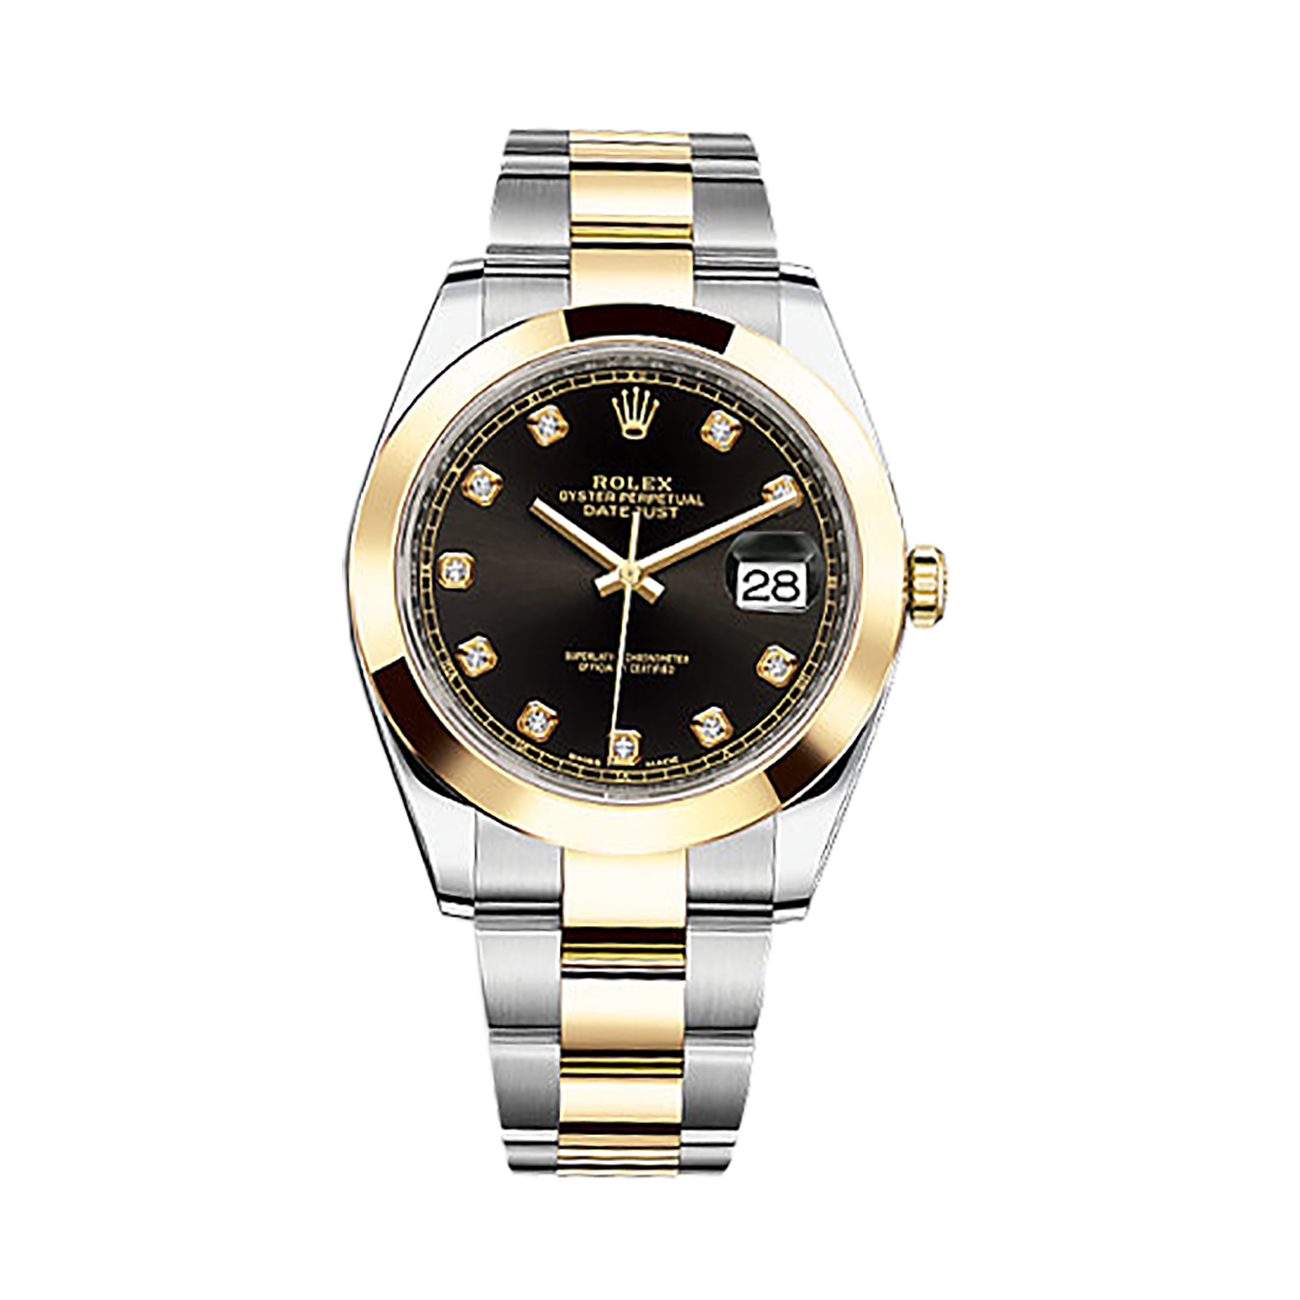 Datejust 41 126303 Gold & Stainless Steel Watch (Black Set with Diamonds)